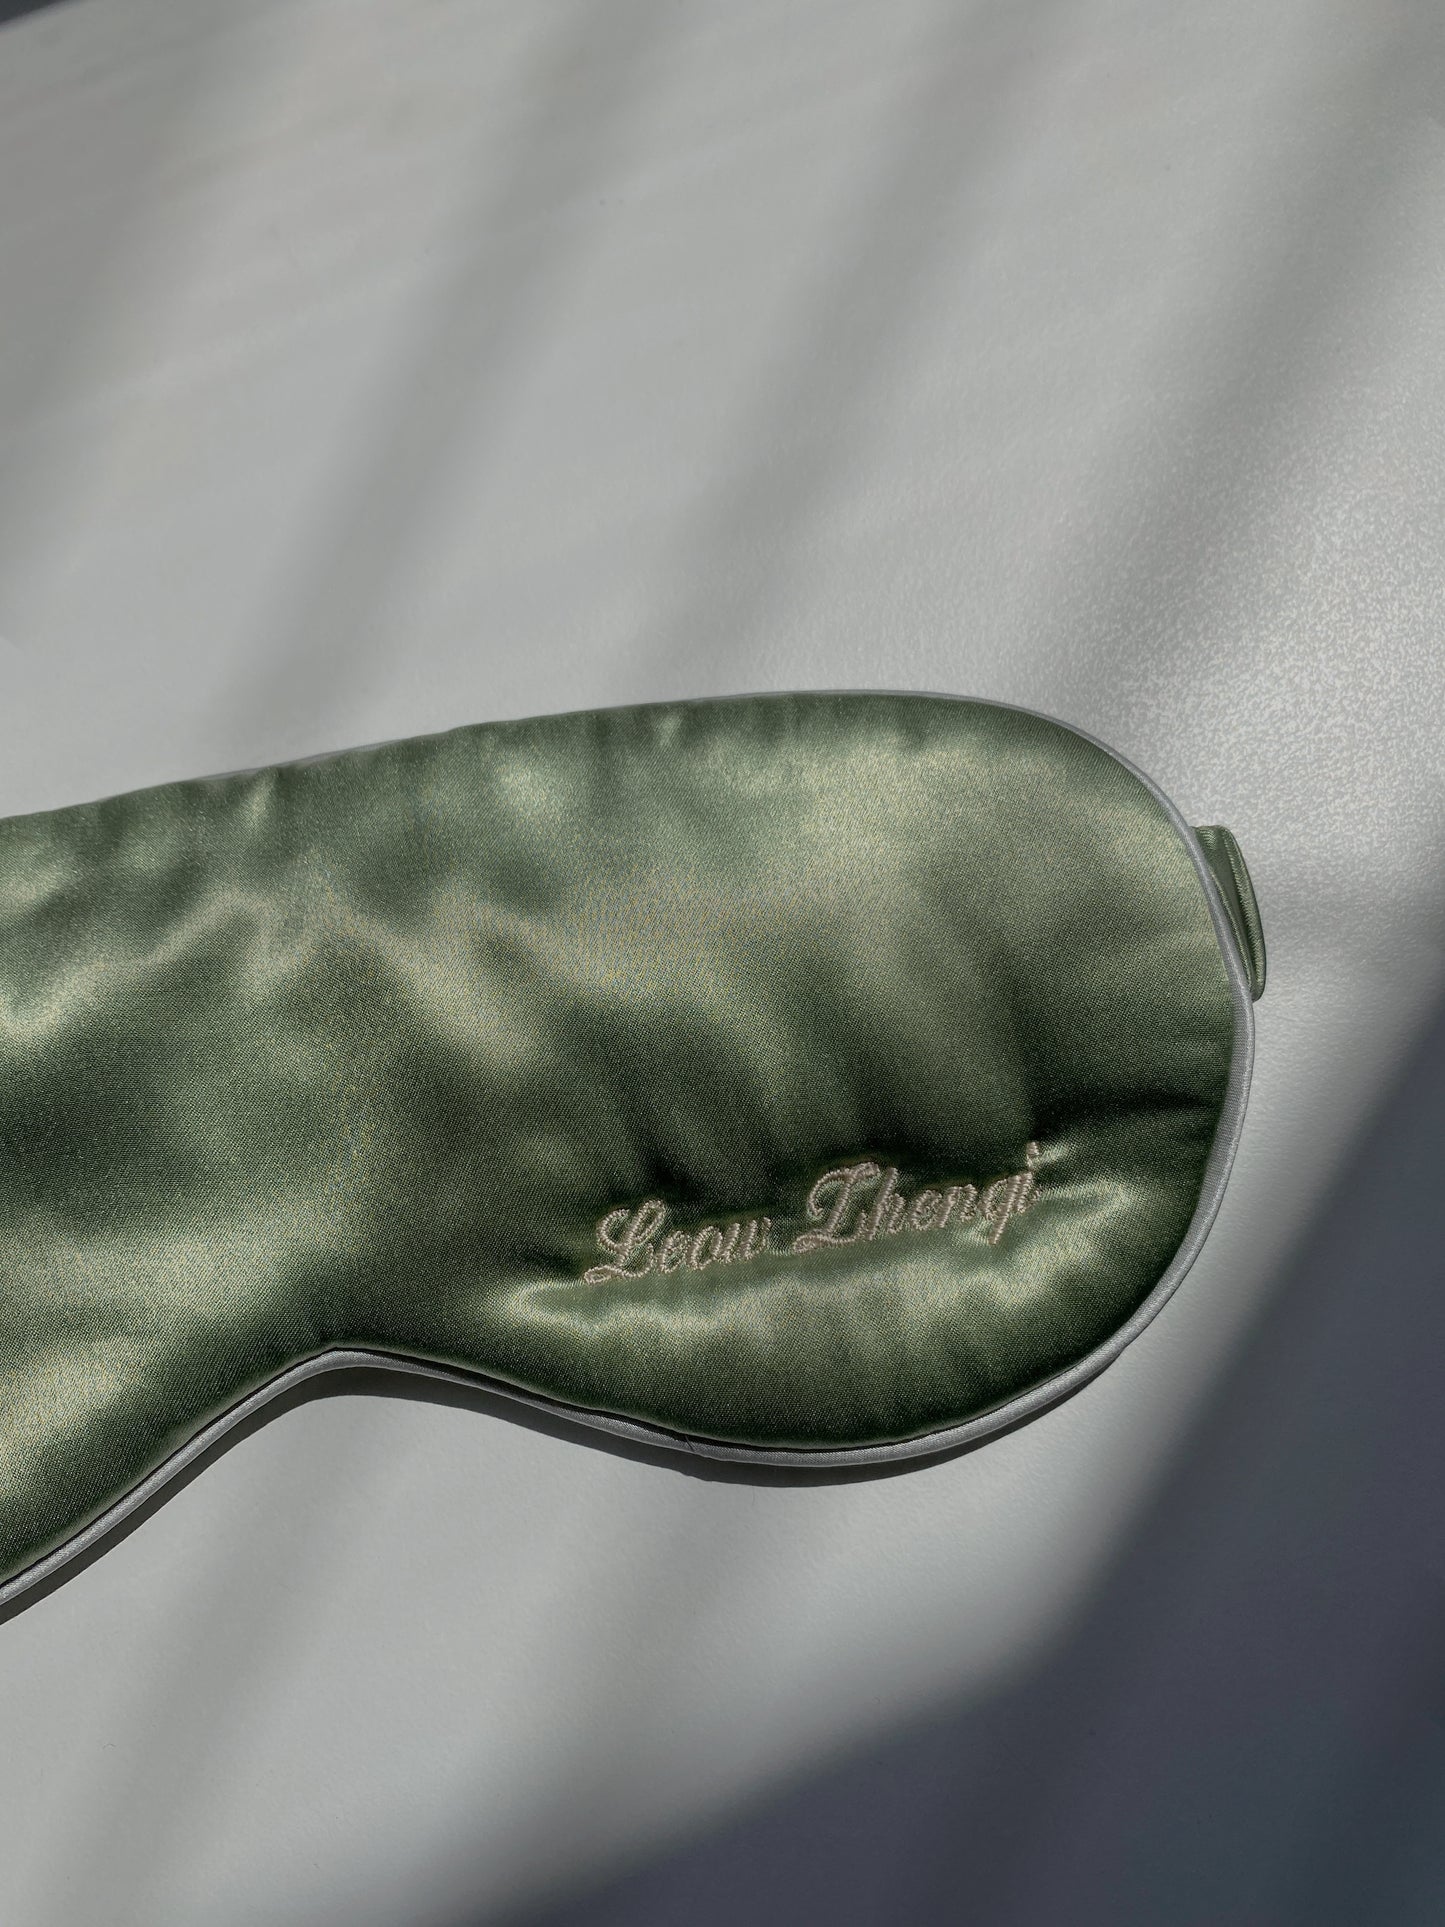 Mulberry Silk Eye Mask with name personalization. Customize your silk eye mask in Singapore Home of Mulberry Silk, White Trousseau now.